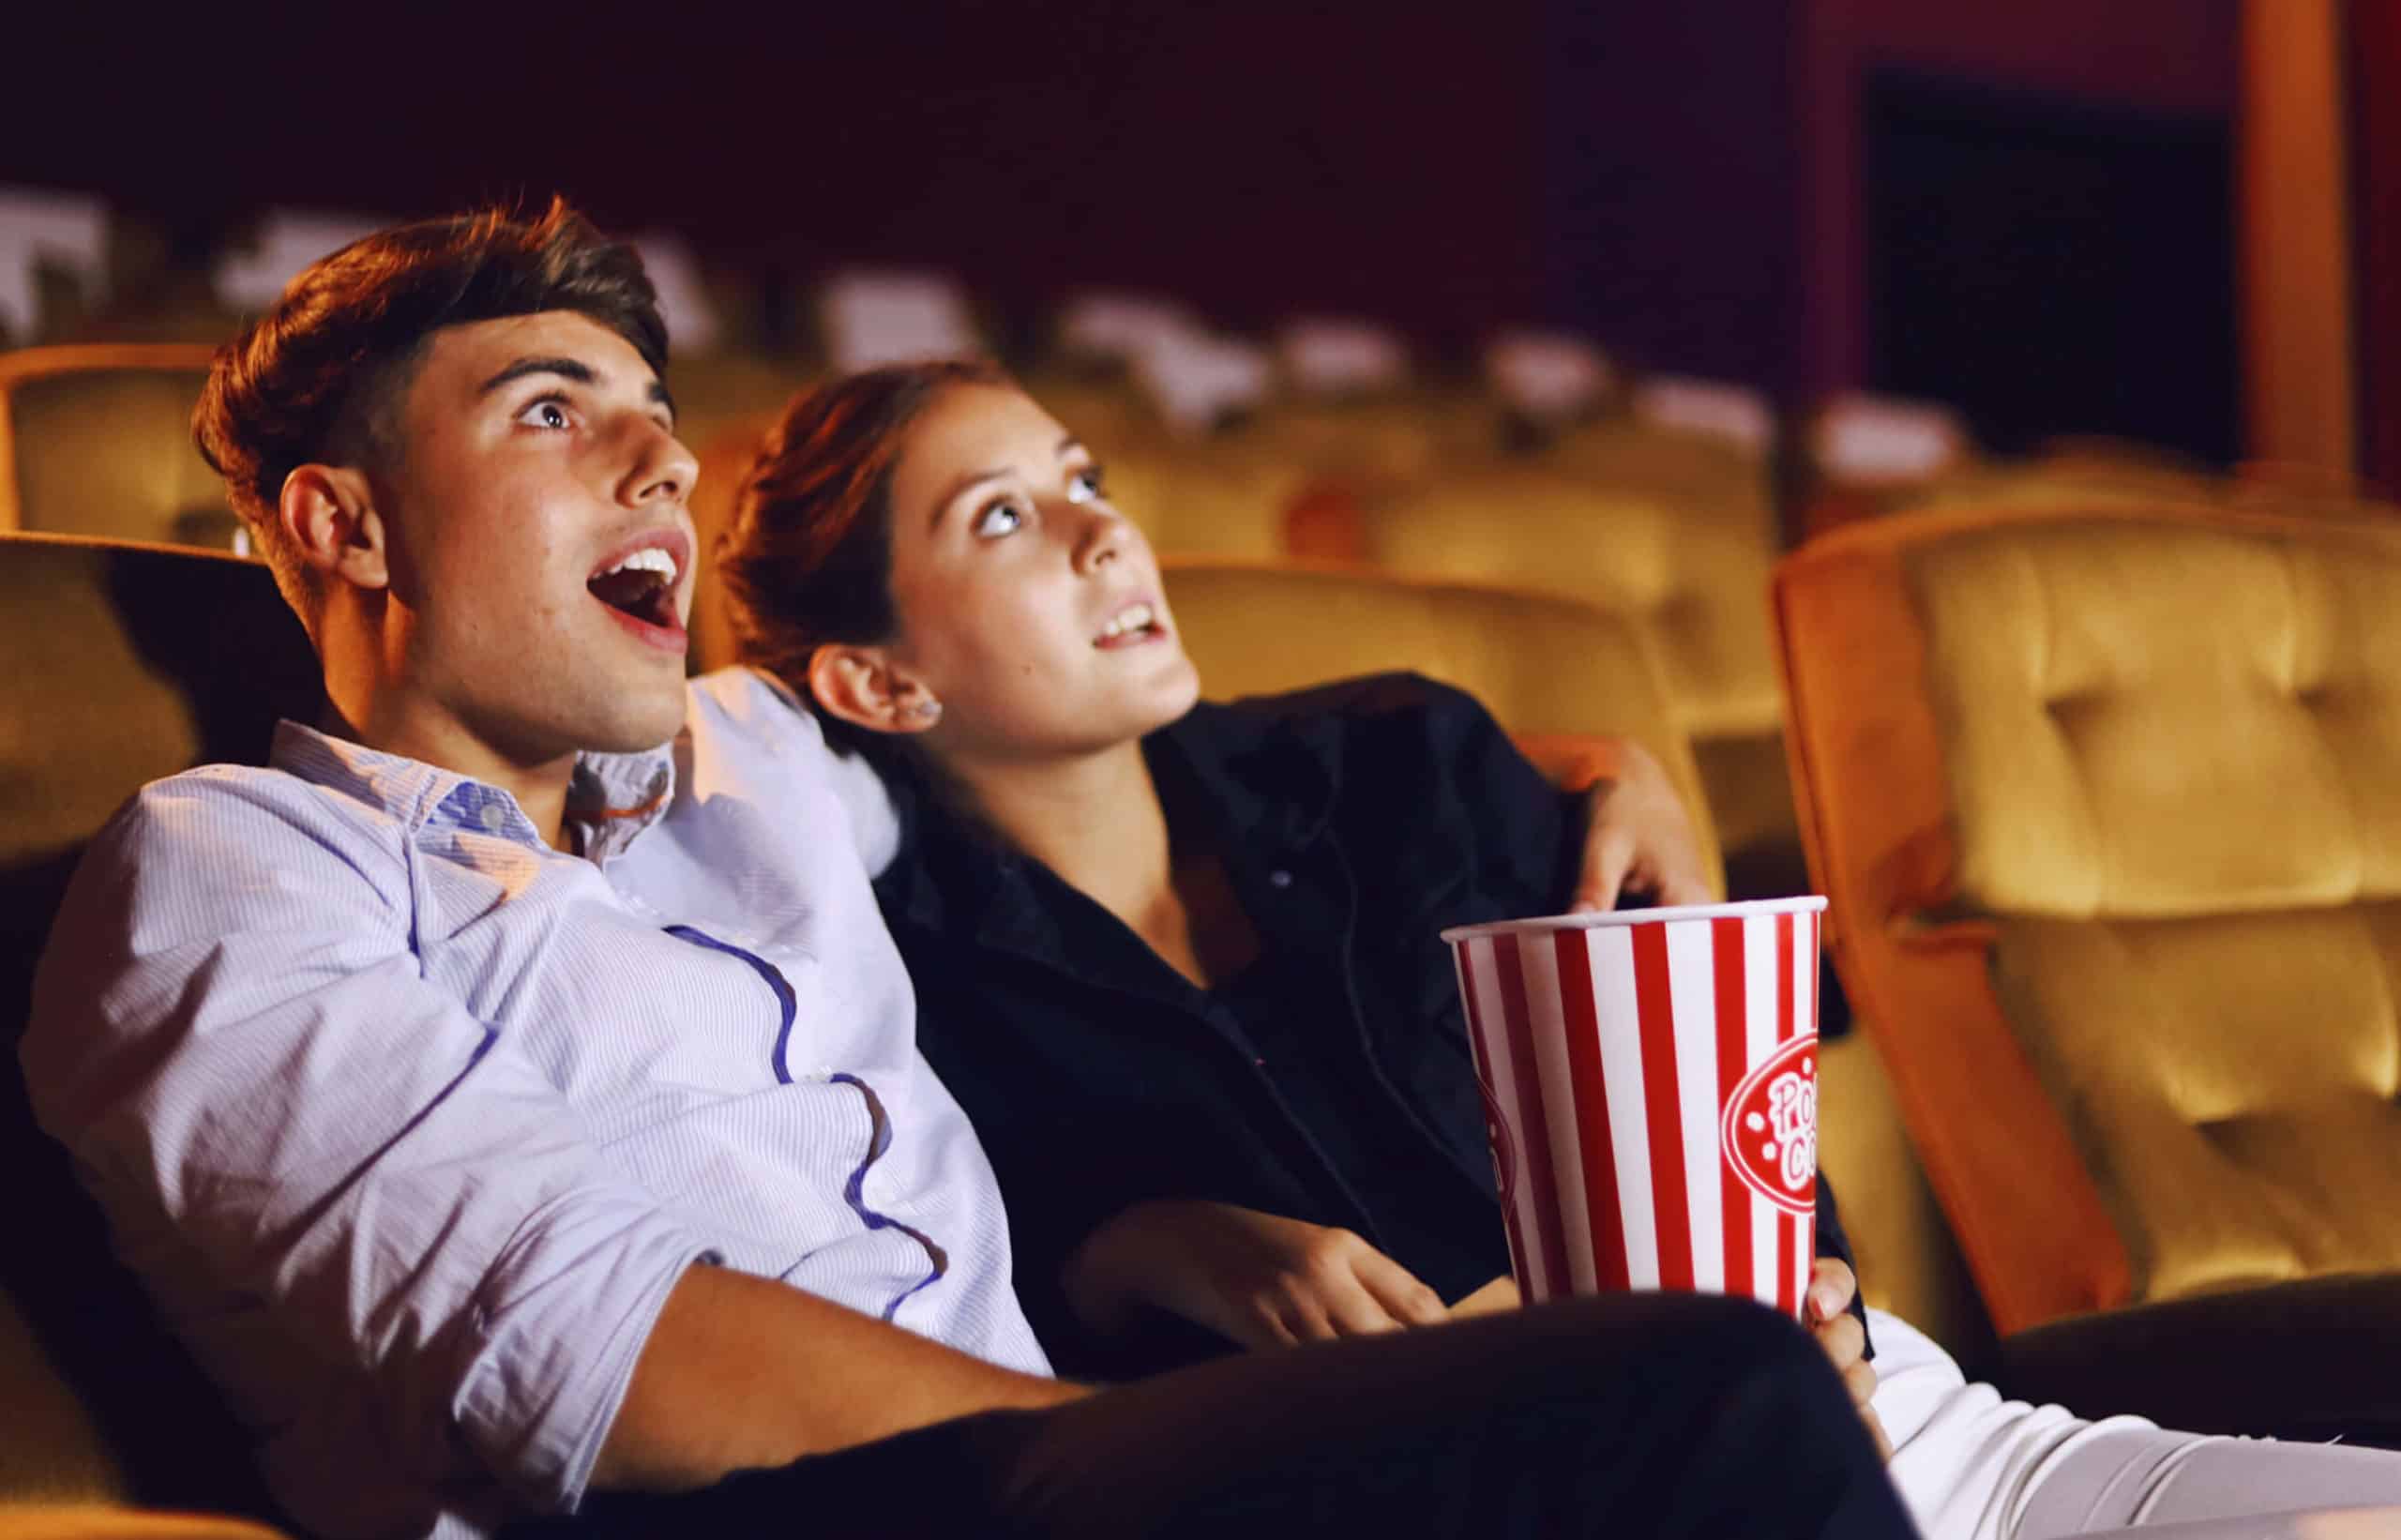 a young man and woman watch a movie in the theater